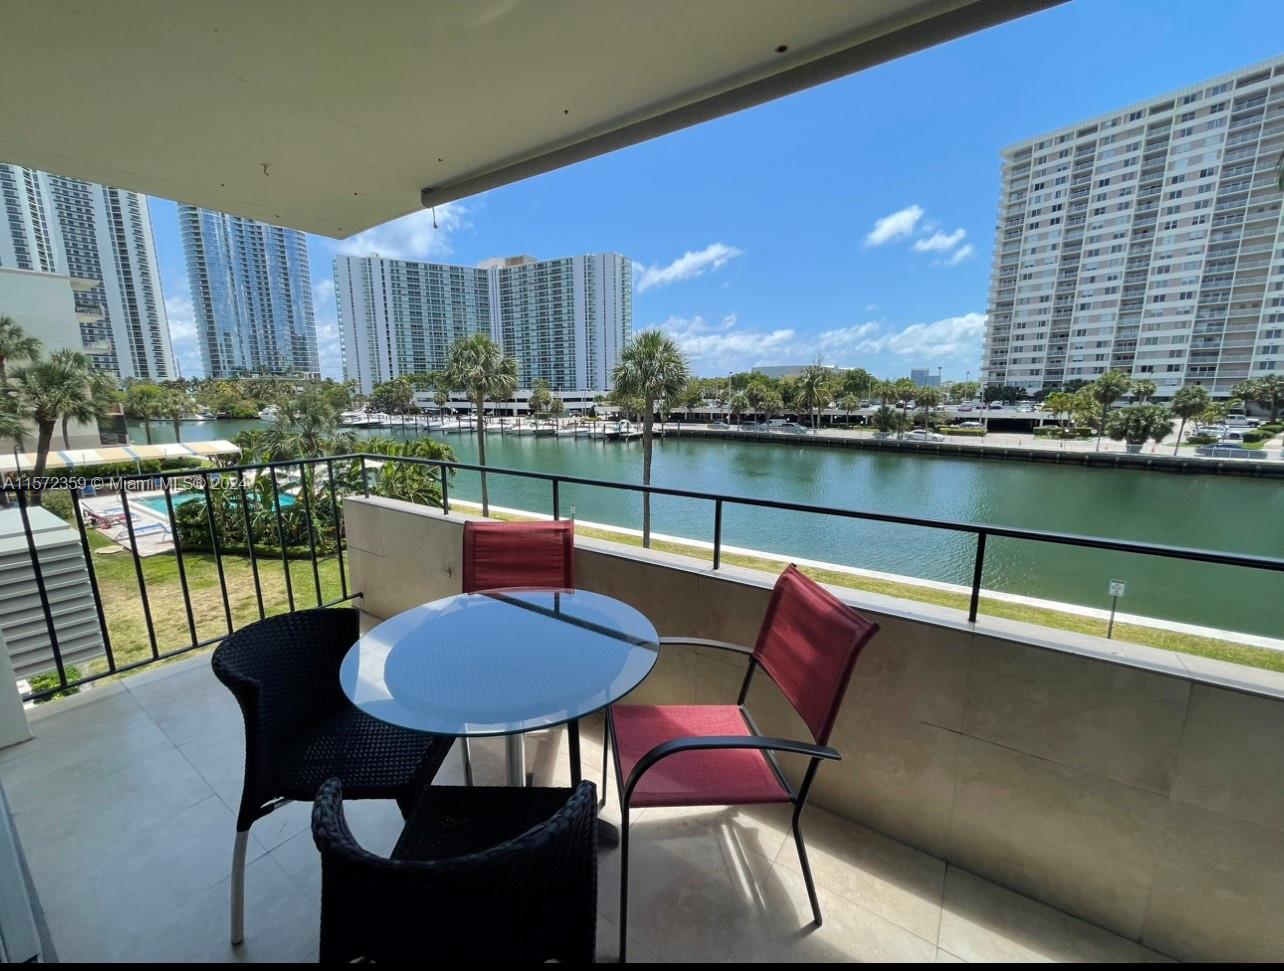 Rental Property at 220 Kings Point Dr 315, Sunny Isles Beach, Miami-Dade County, Florida - Bedrooms: 2 
Bathrooms: 1  - $2,900 MO.